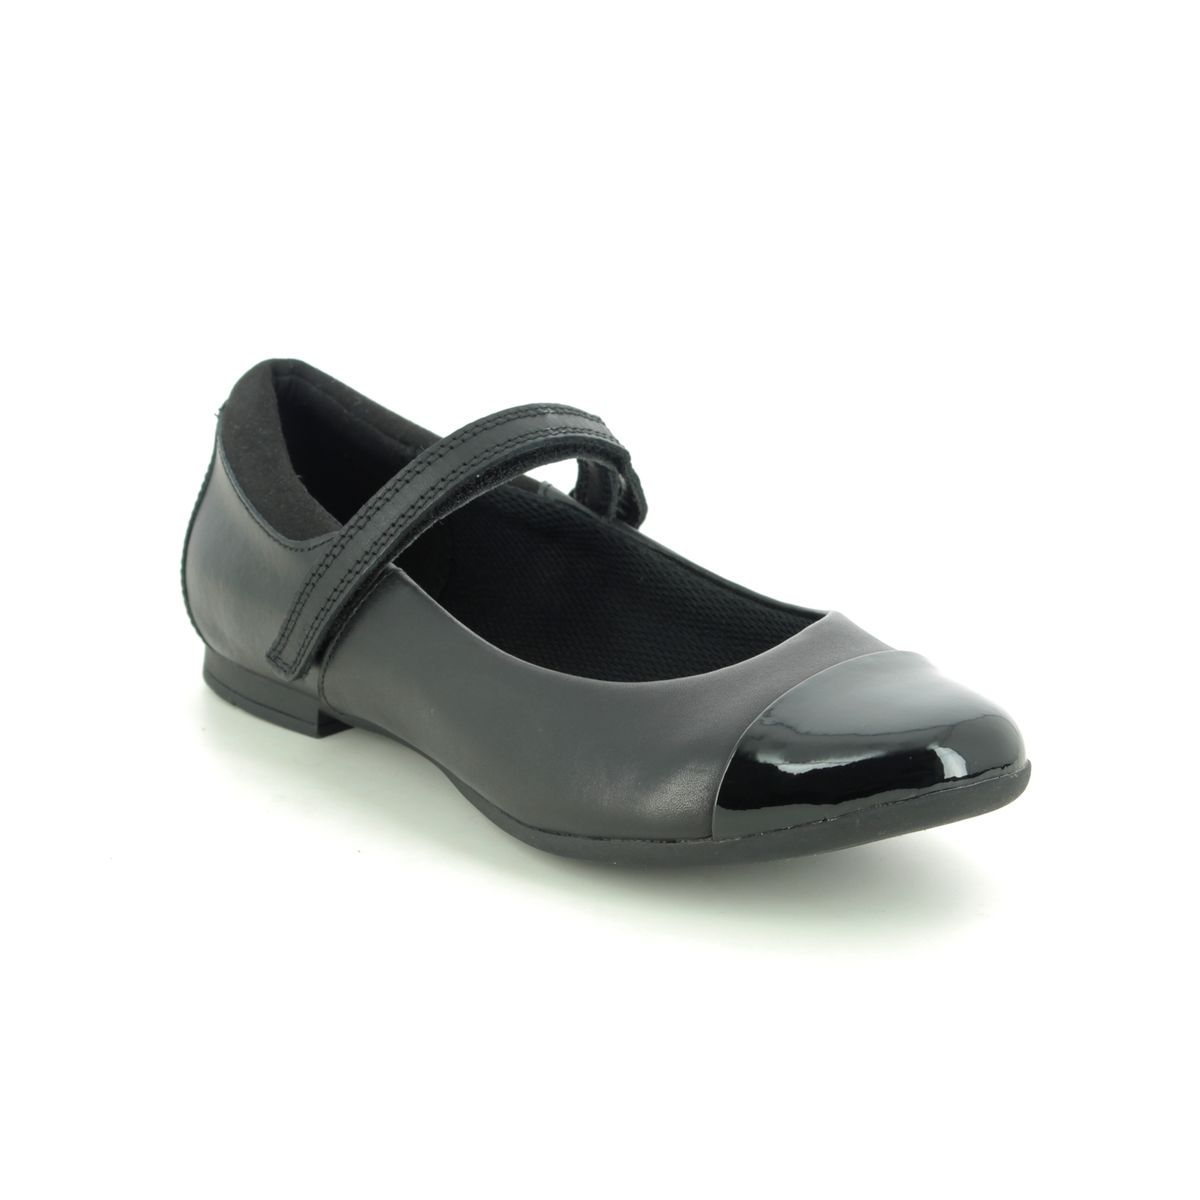 Clarks Scala Gem Y Black leather Kids girls school shoes 4955-76F in a Plain Leather in Size 5